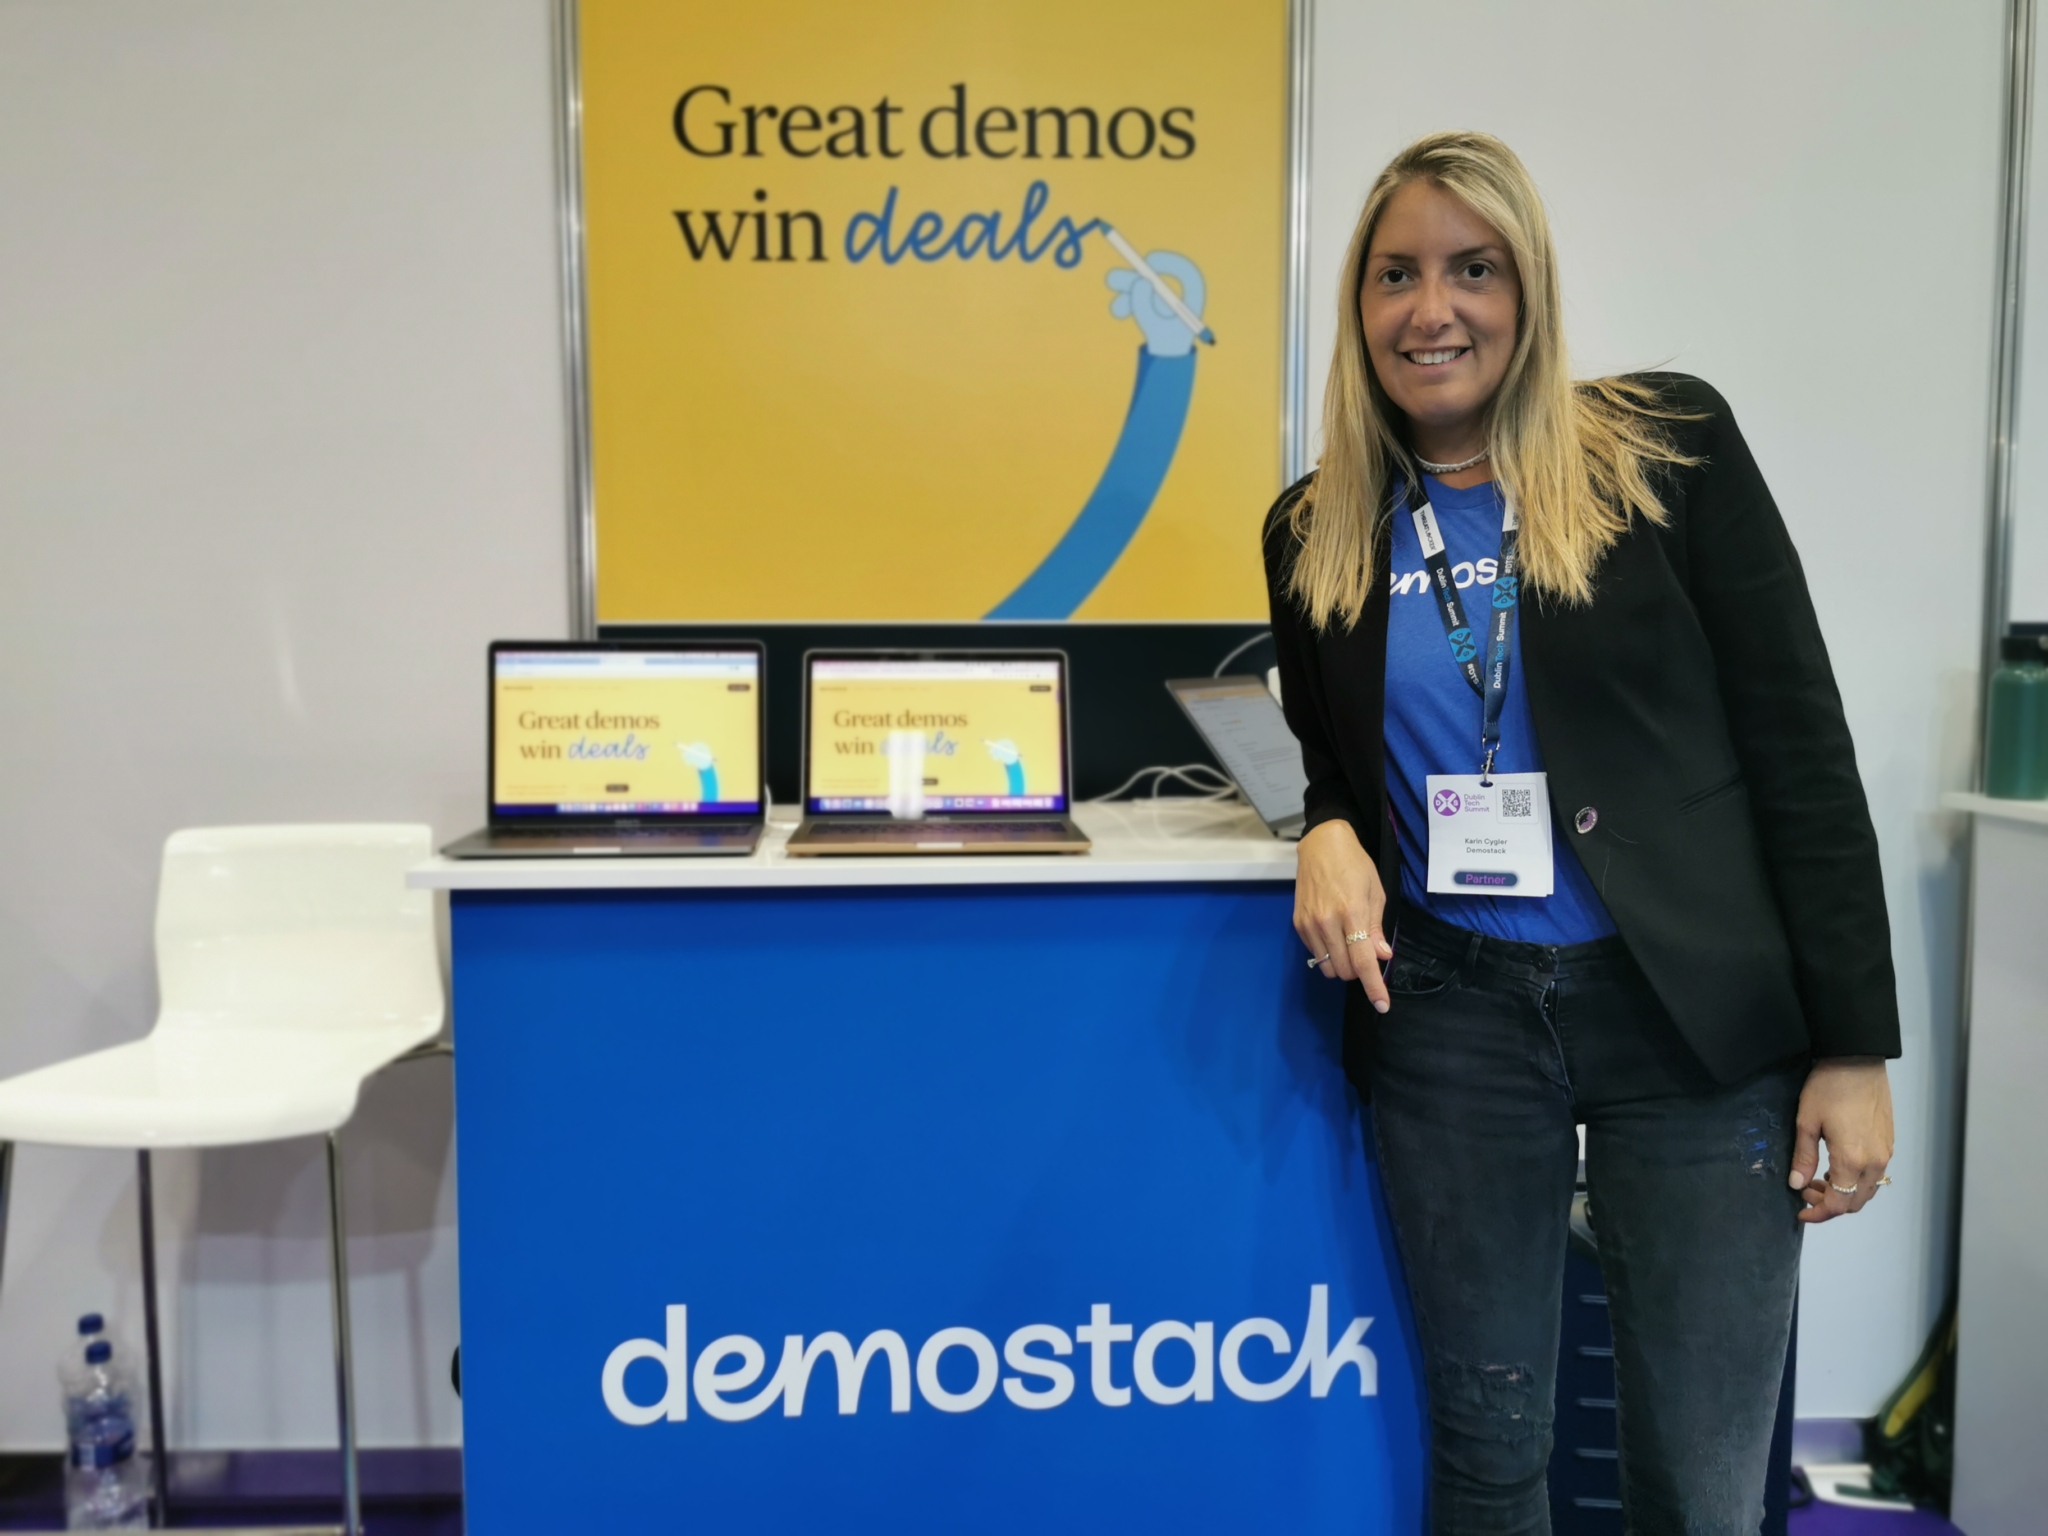 A woman stands at the demostack exhibitor stand at Dublin Tech Summit